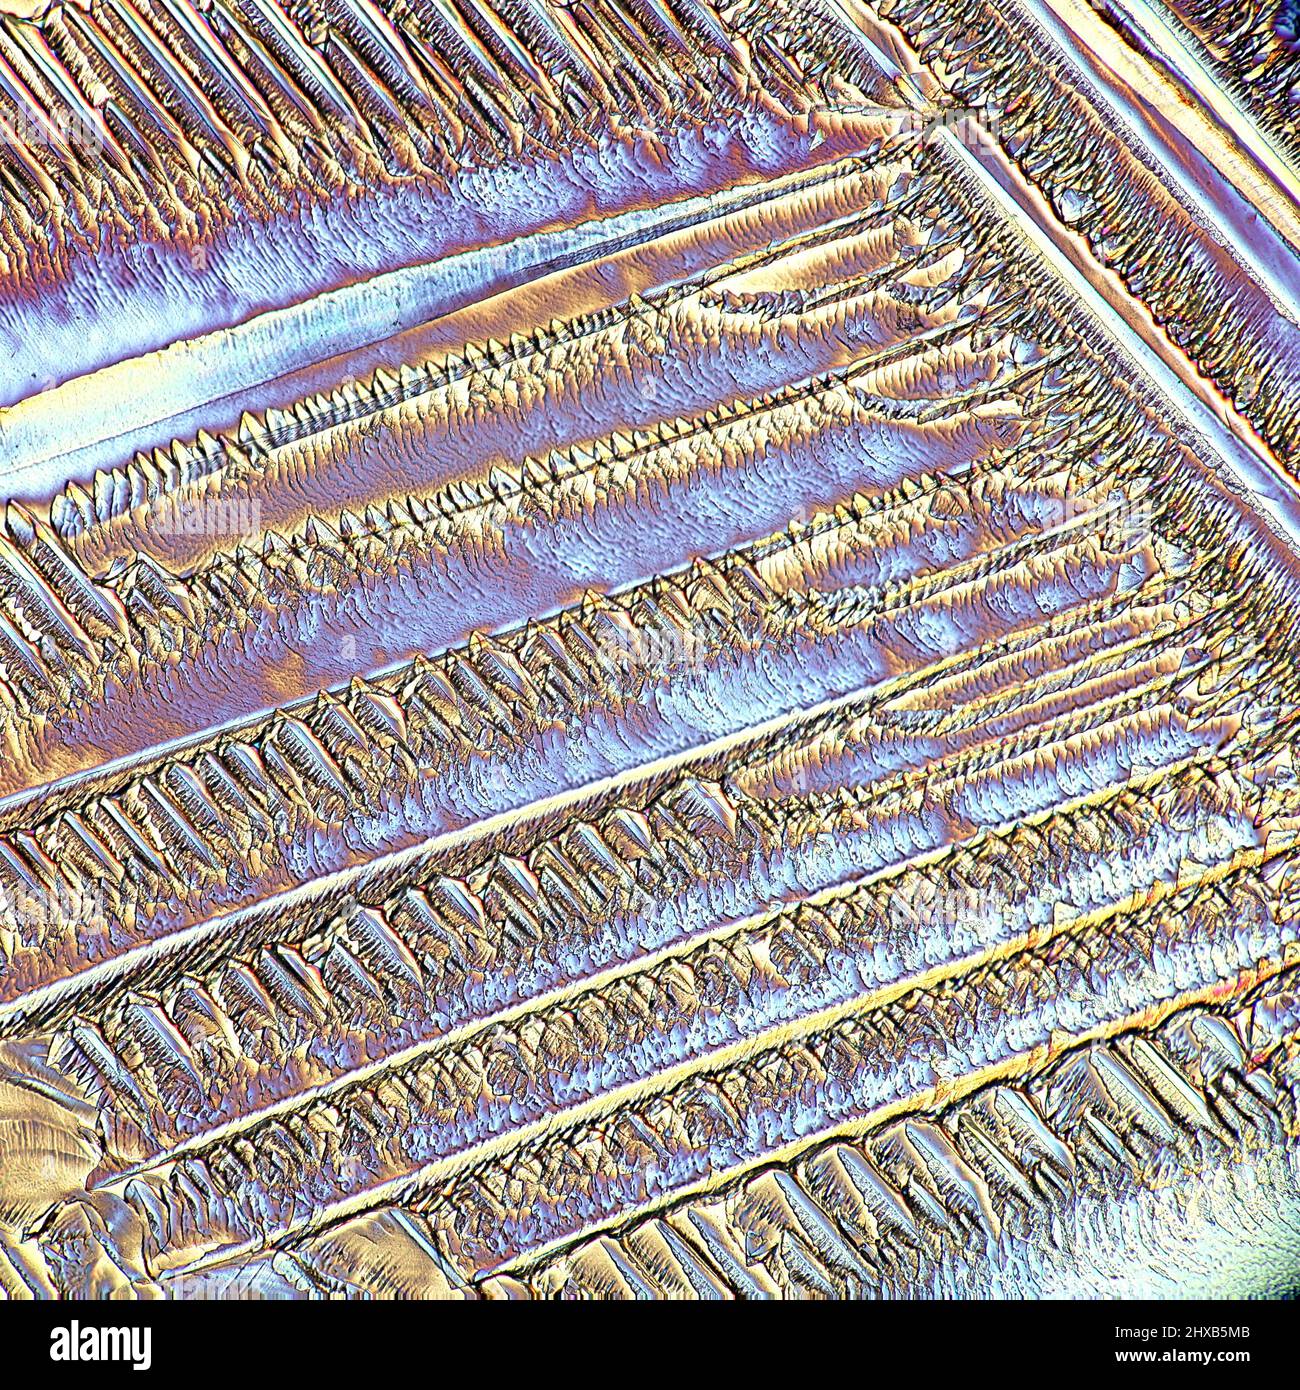 Crystals of a common painkiller Paracetamol. Microscope image, photographed in  polarized light. Stock Photo